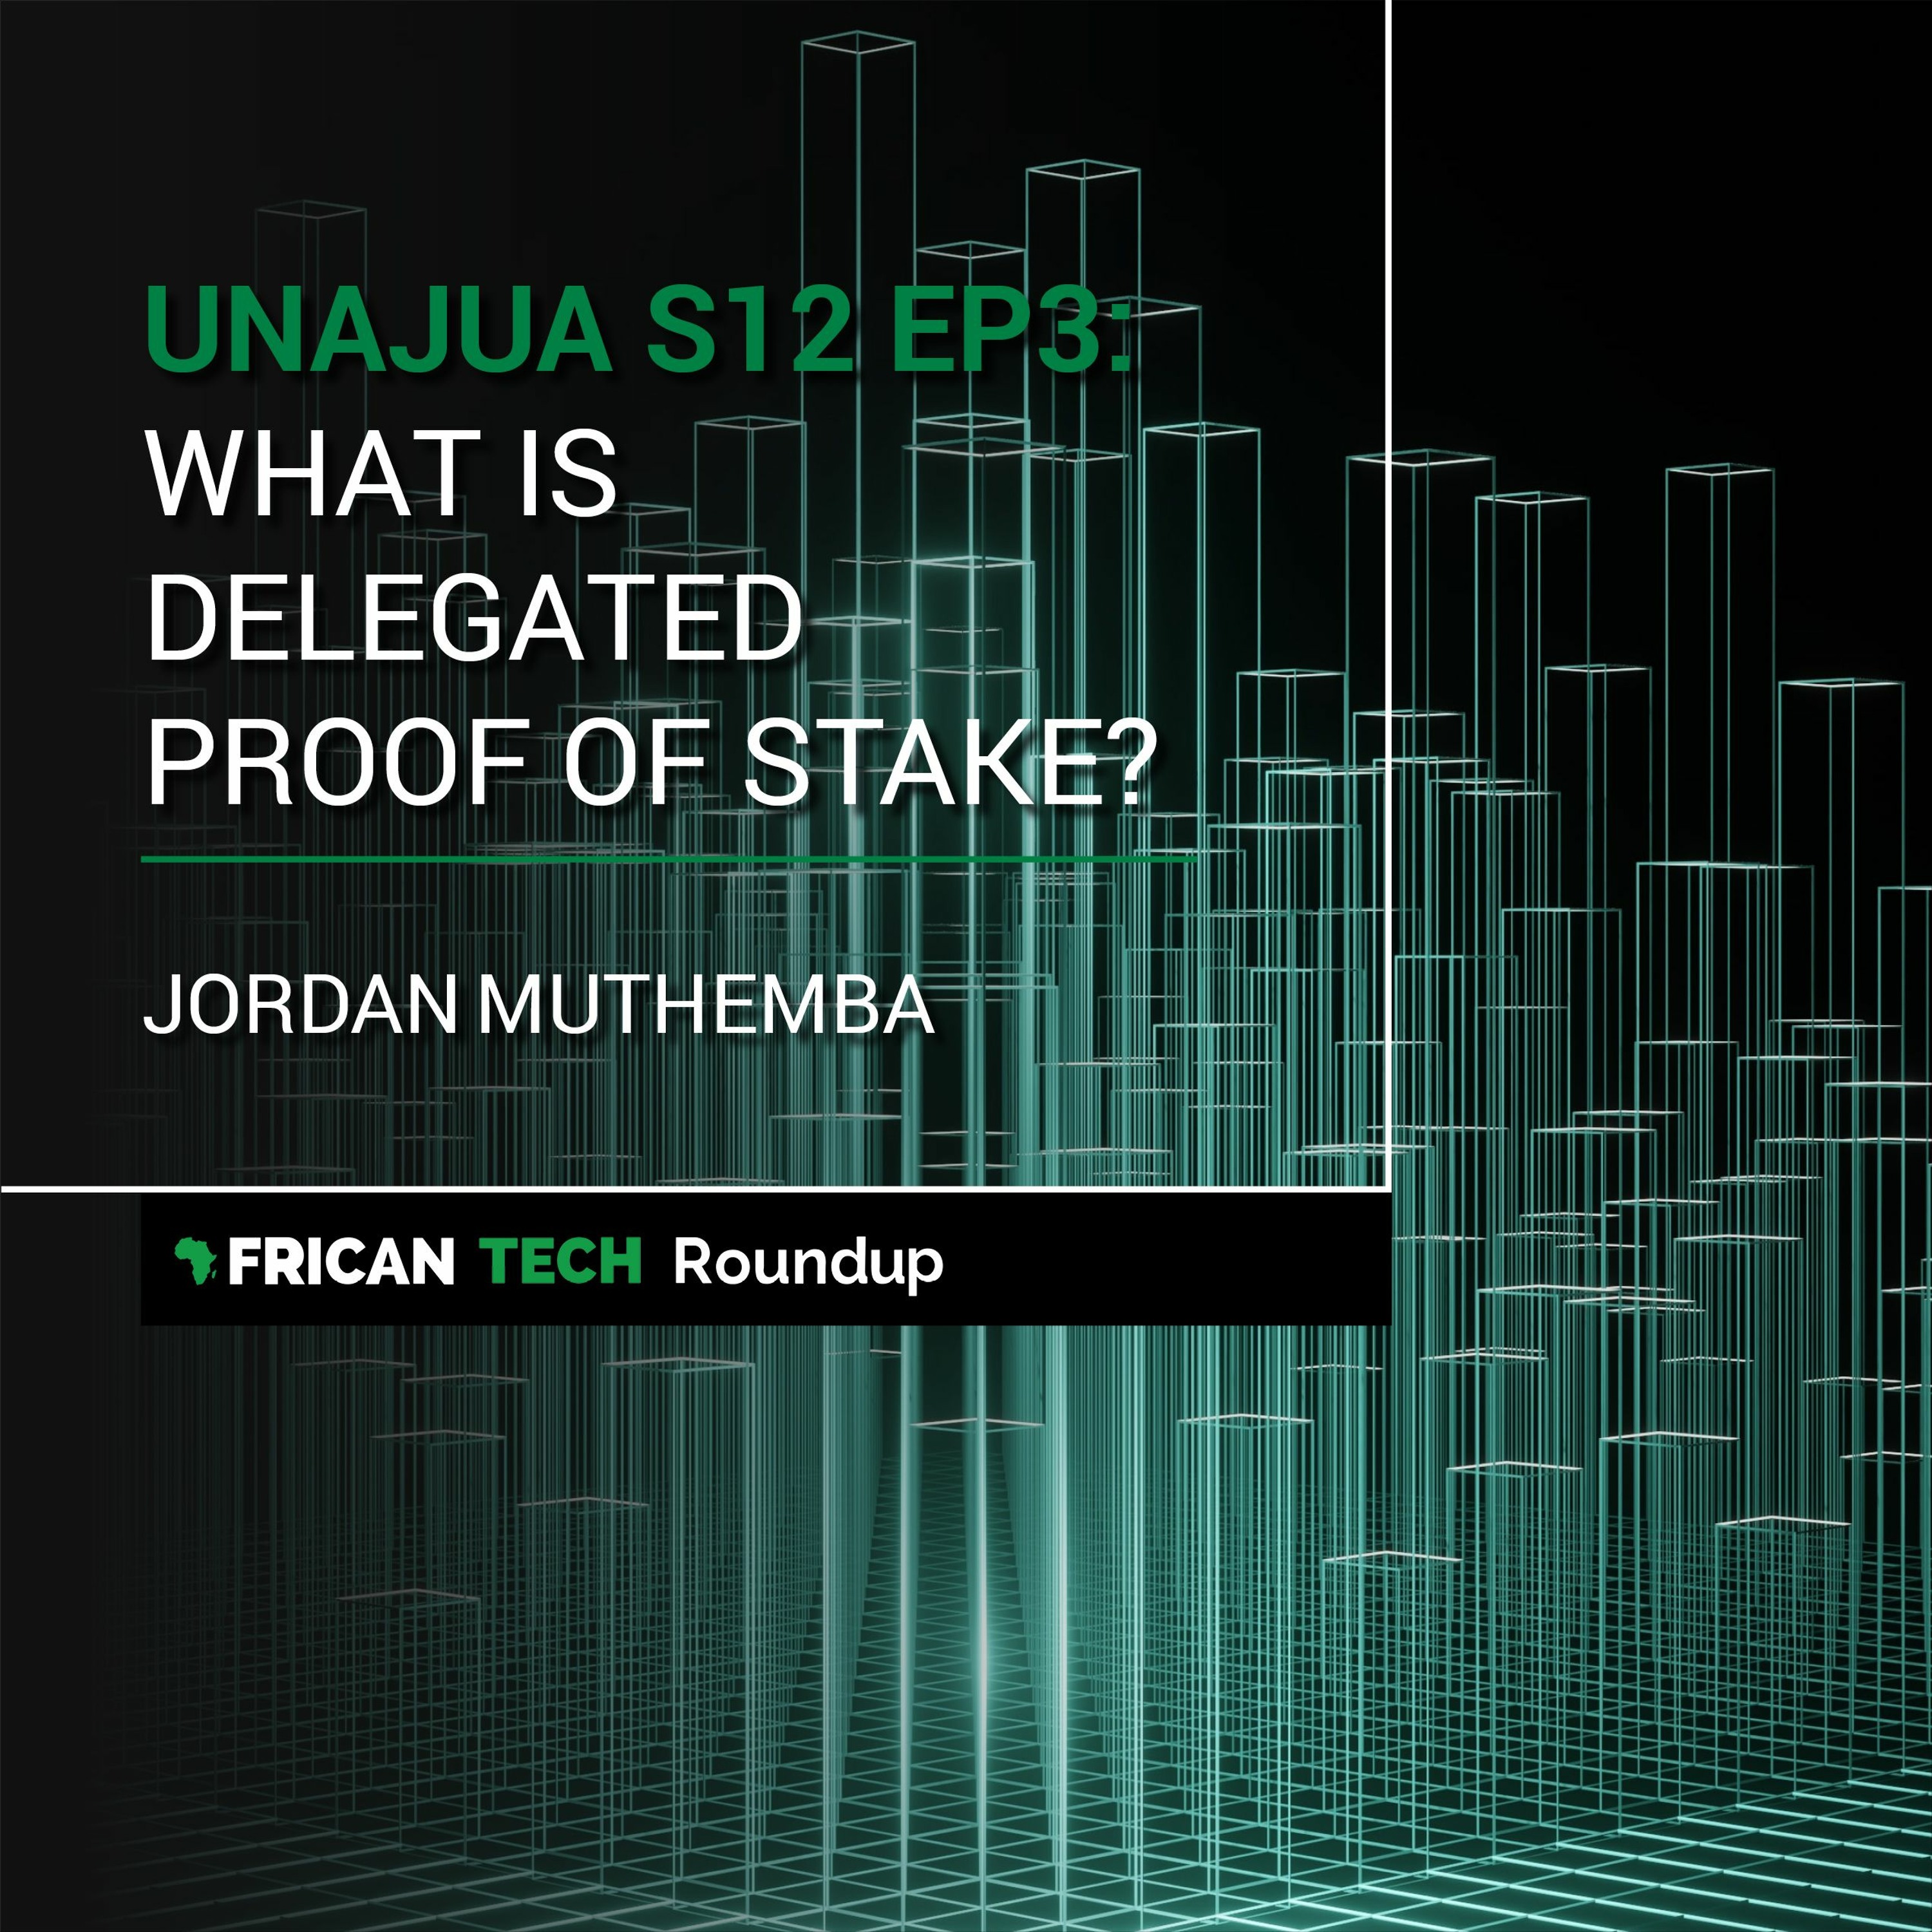 UNAJUA S12 EP3: What is 'Delegated Proof of Stake'? feat. Jordan Muthemba